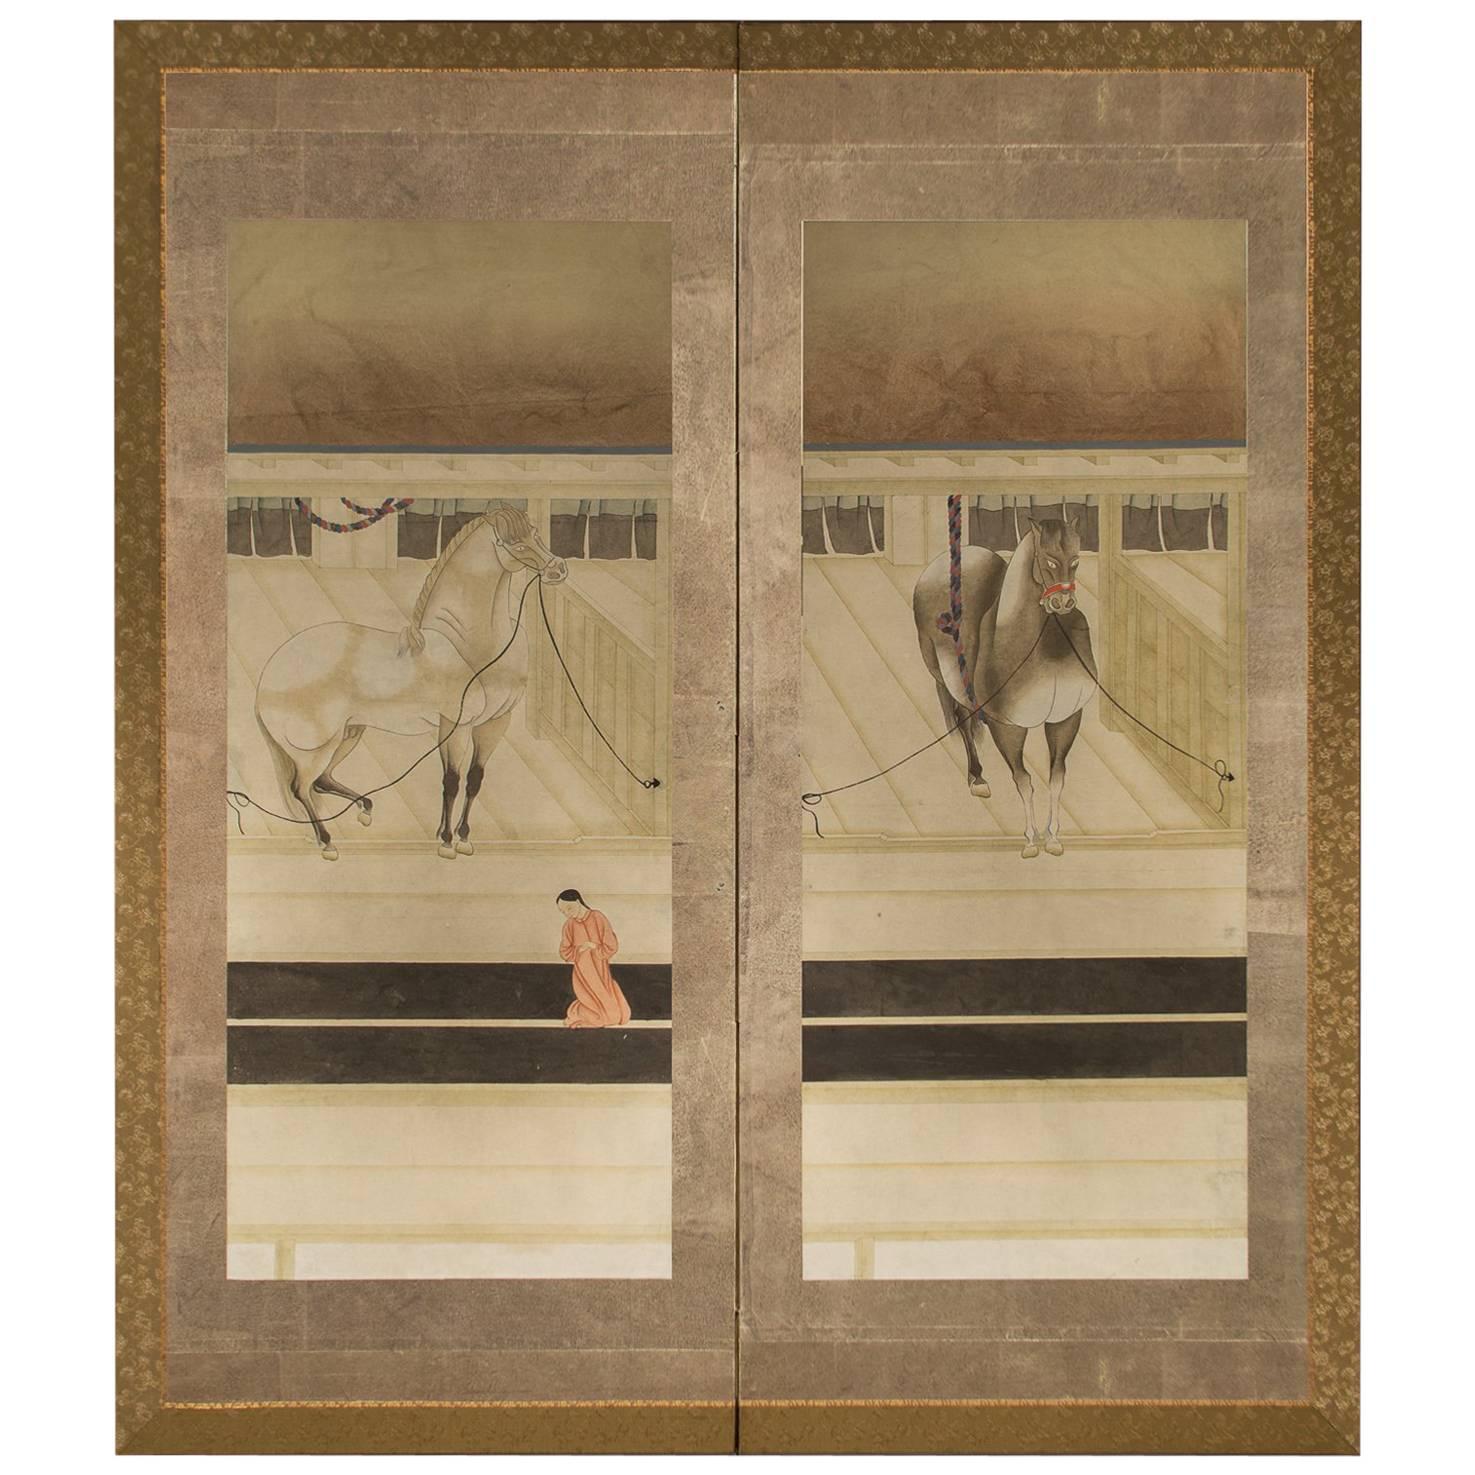 Japanese Two-Panel Screen, Horses in Stable with Attendant